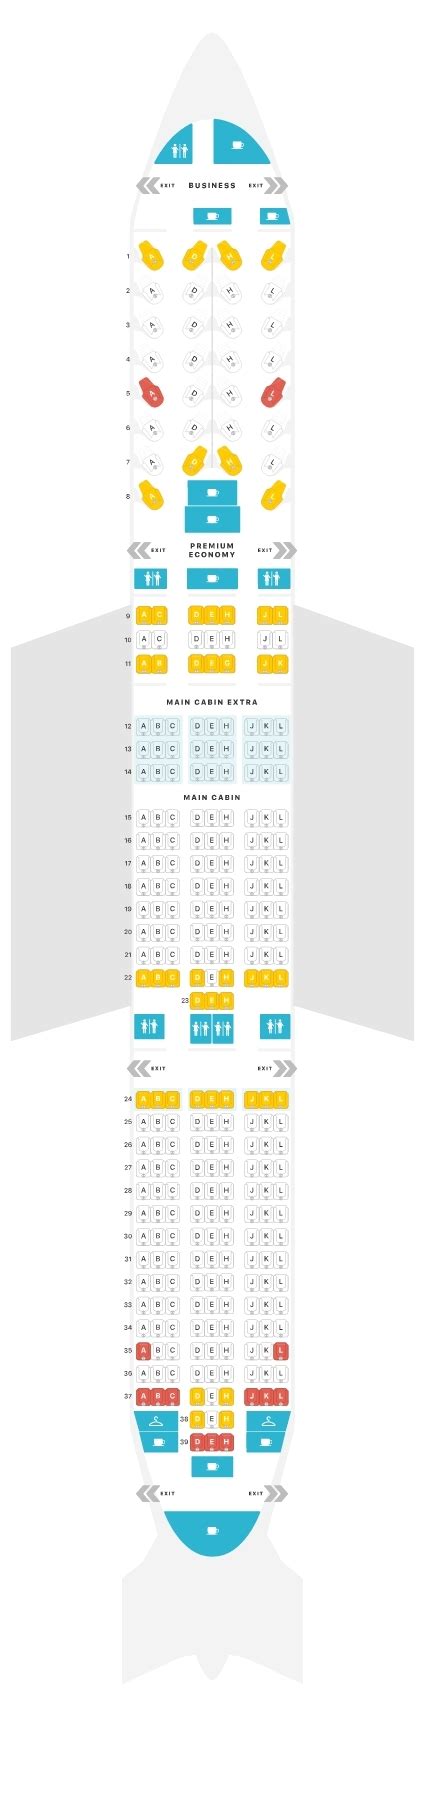 American Airlines Flight Seating Plan Two Birds Home